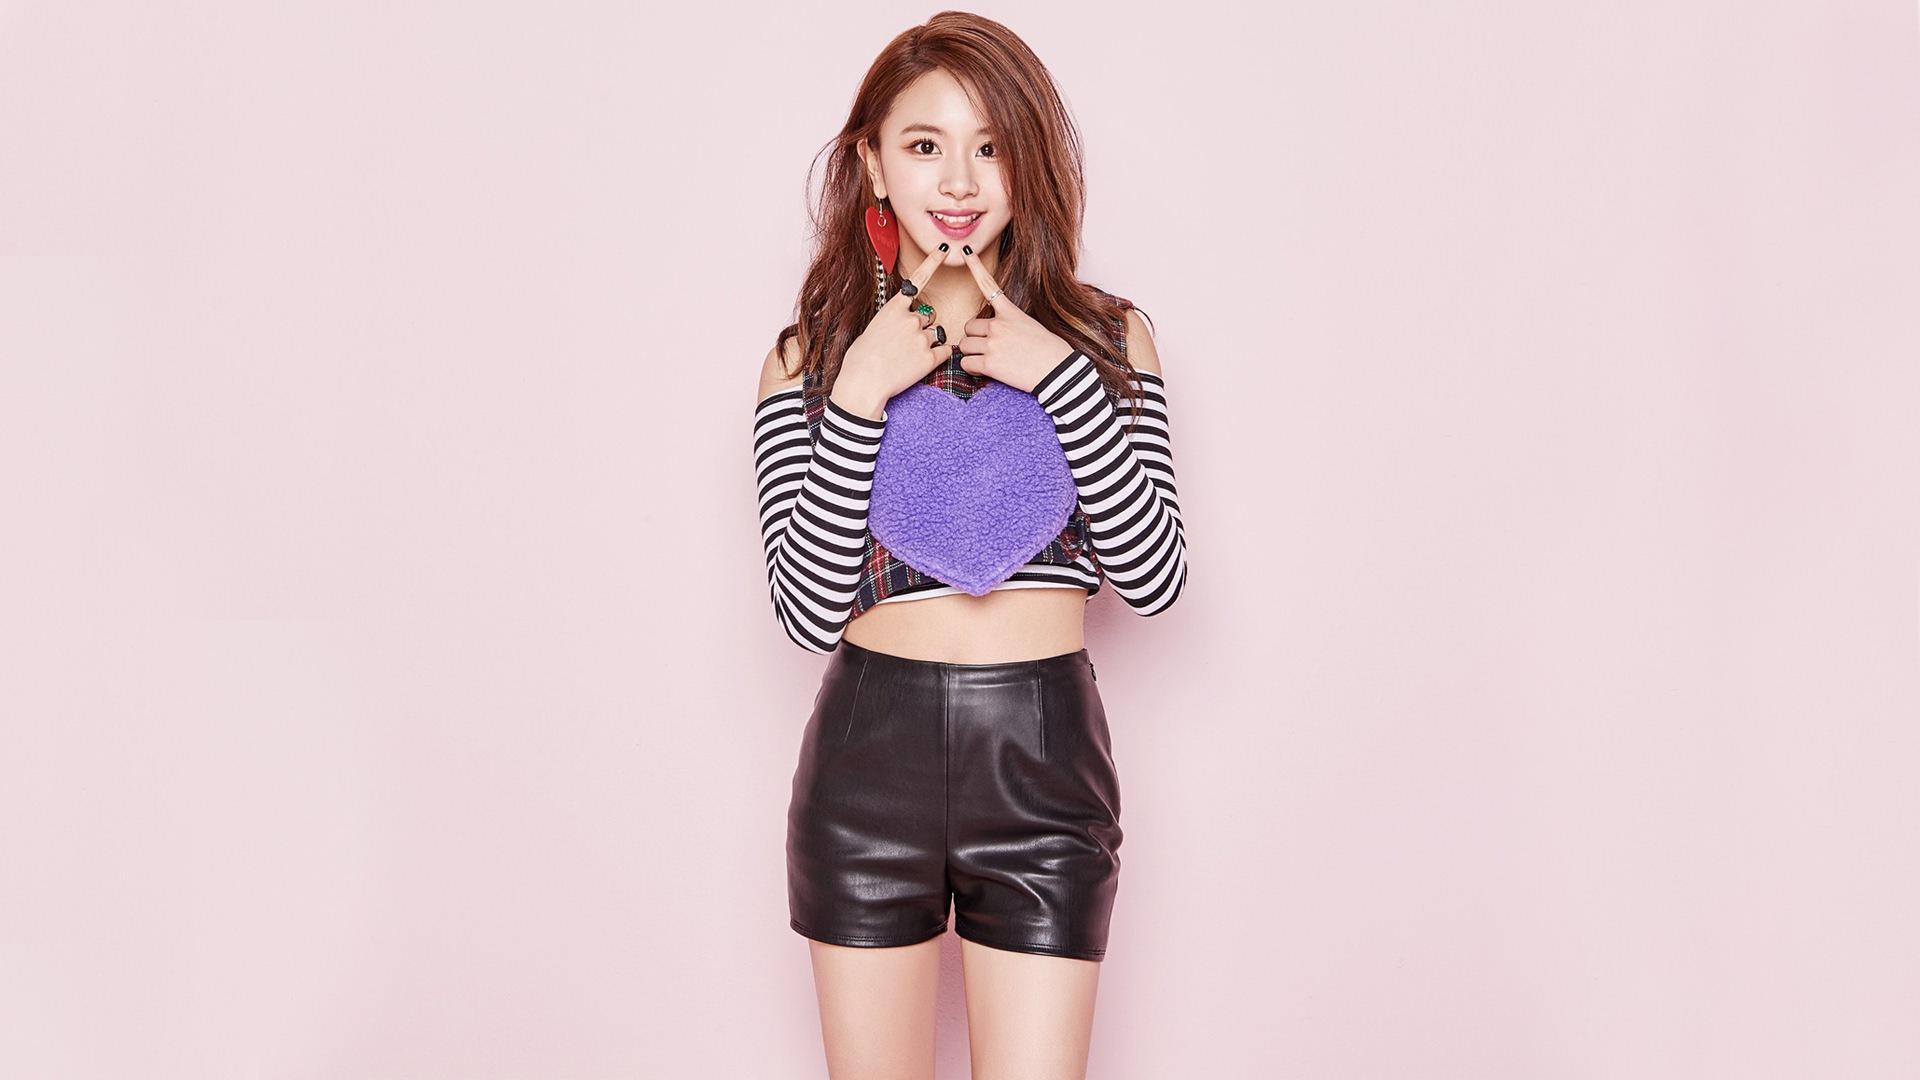 Park Chaeyoung Wallpapers - Wallpaper Cave